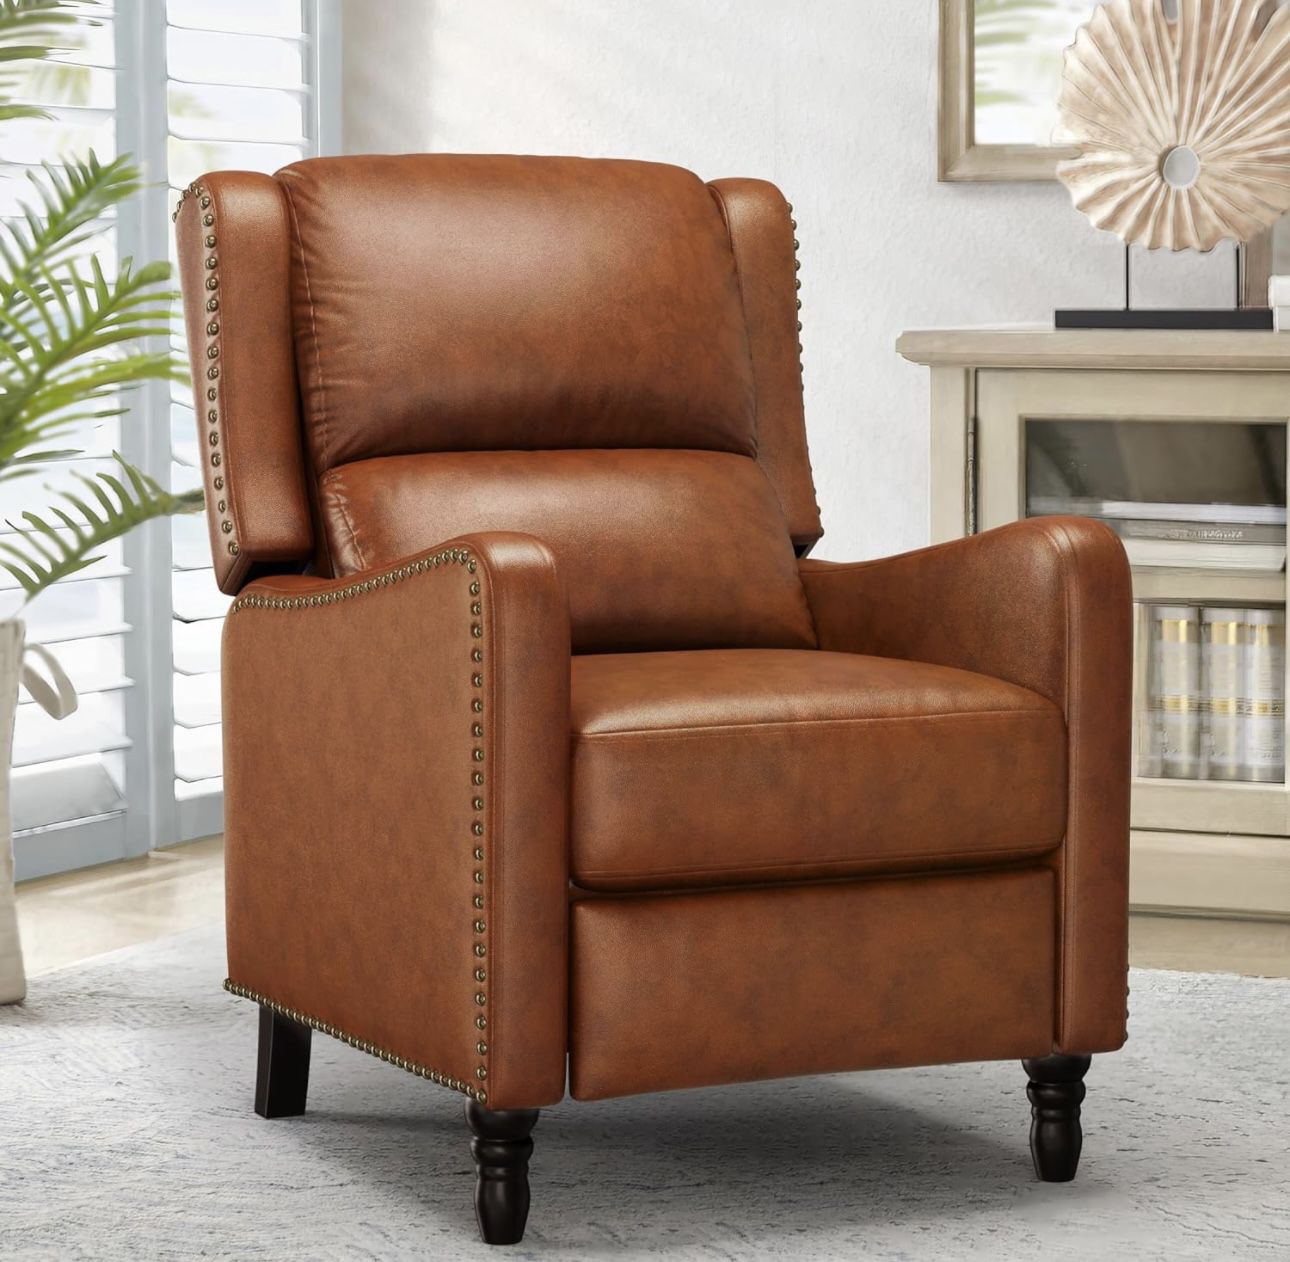 Upholstered Recliner Chair, Leather Push Back Recliner Chairs with Footrest